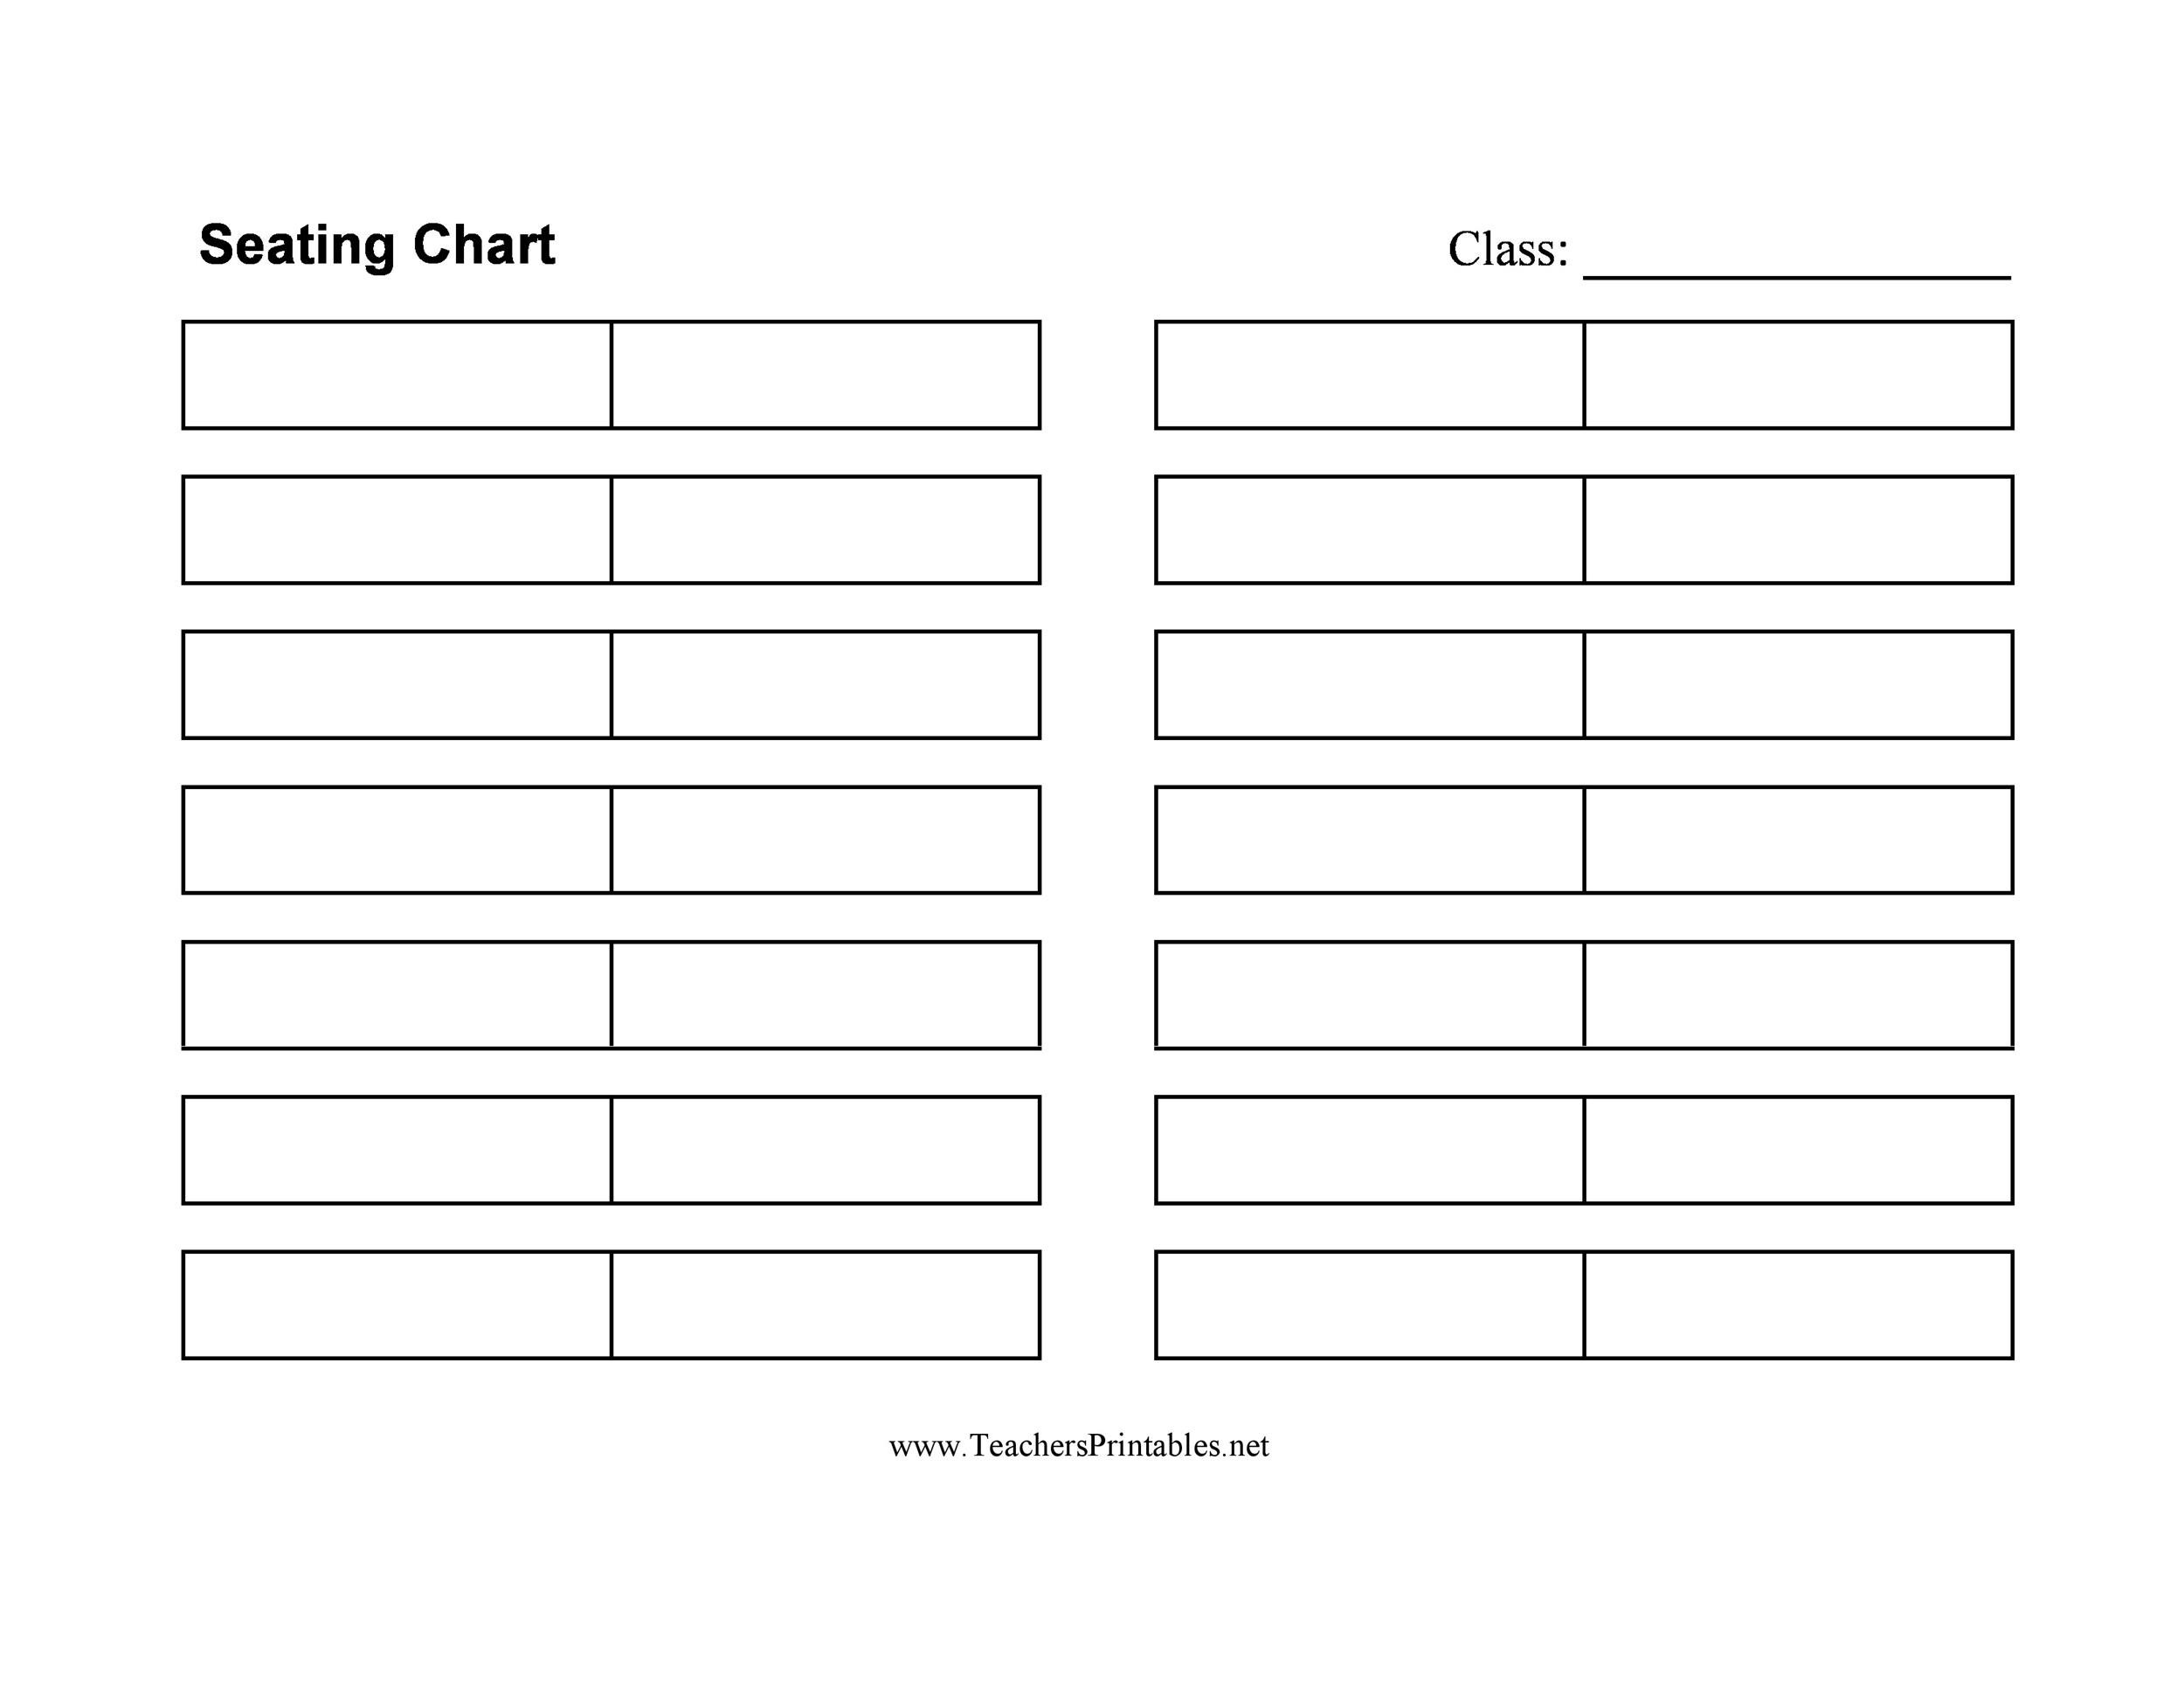 free-editable-classroom-seating-chart-template-best-home-design-ideas